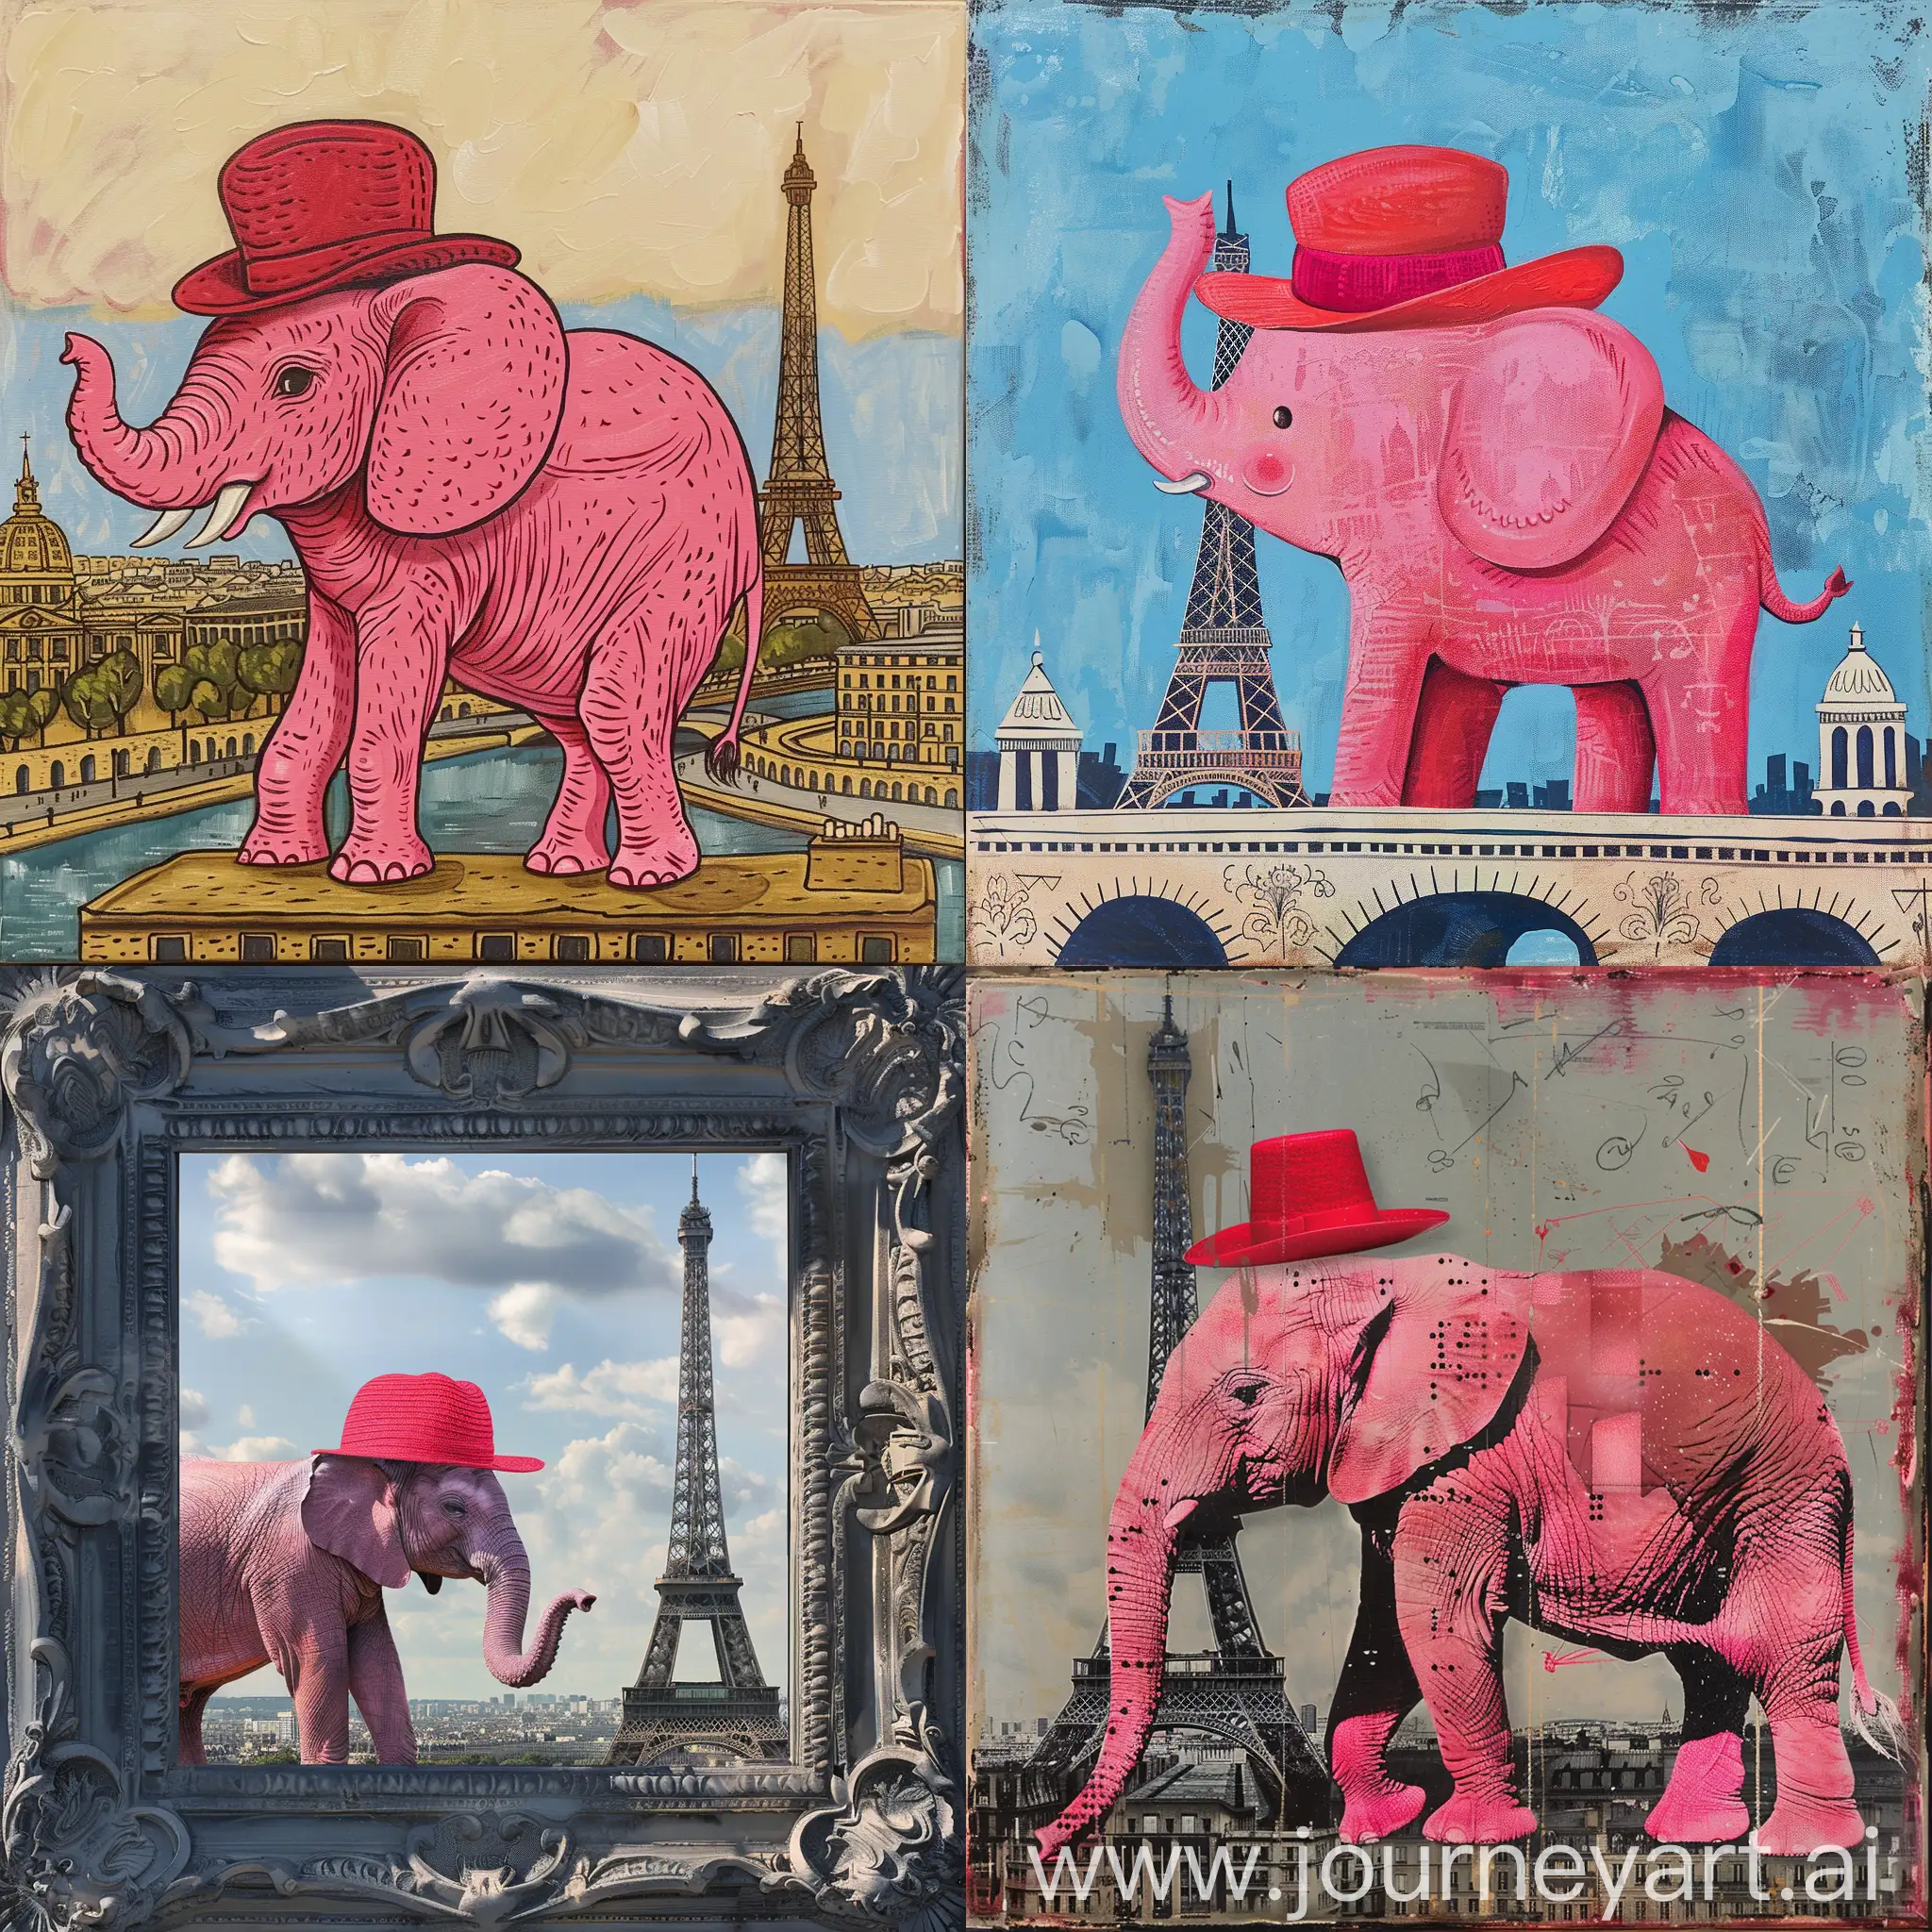 Quirky-Pink-Elephant-Wearing-a-Red-Hat-Roaming-the-Streets-of-Paris